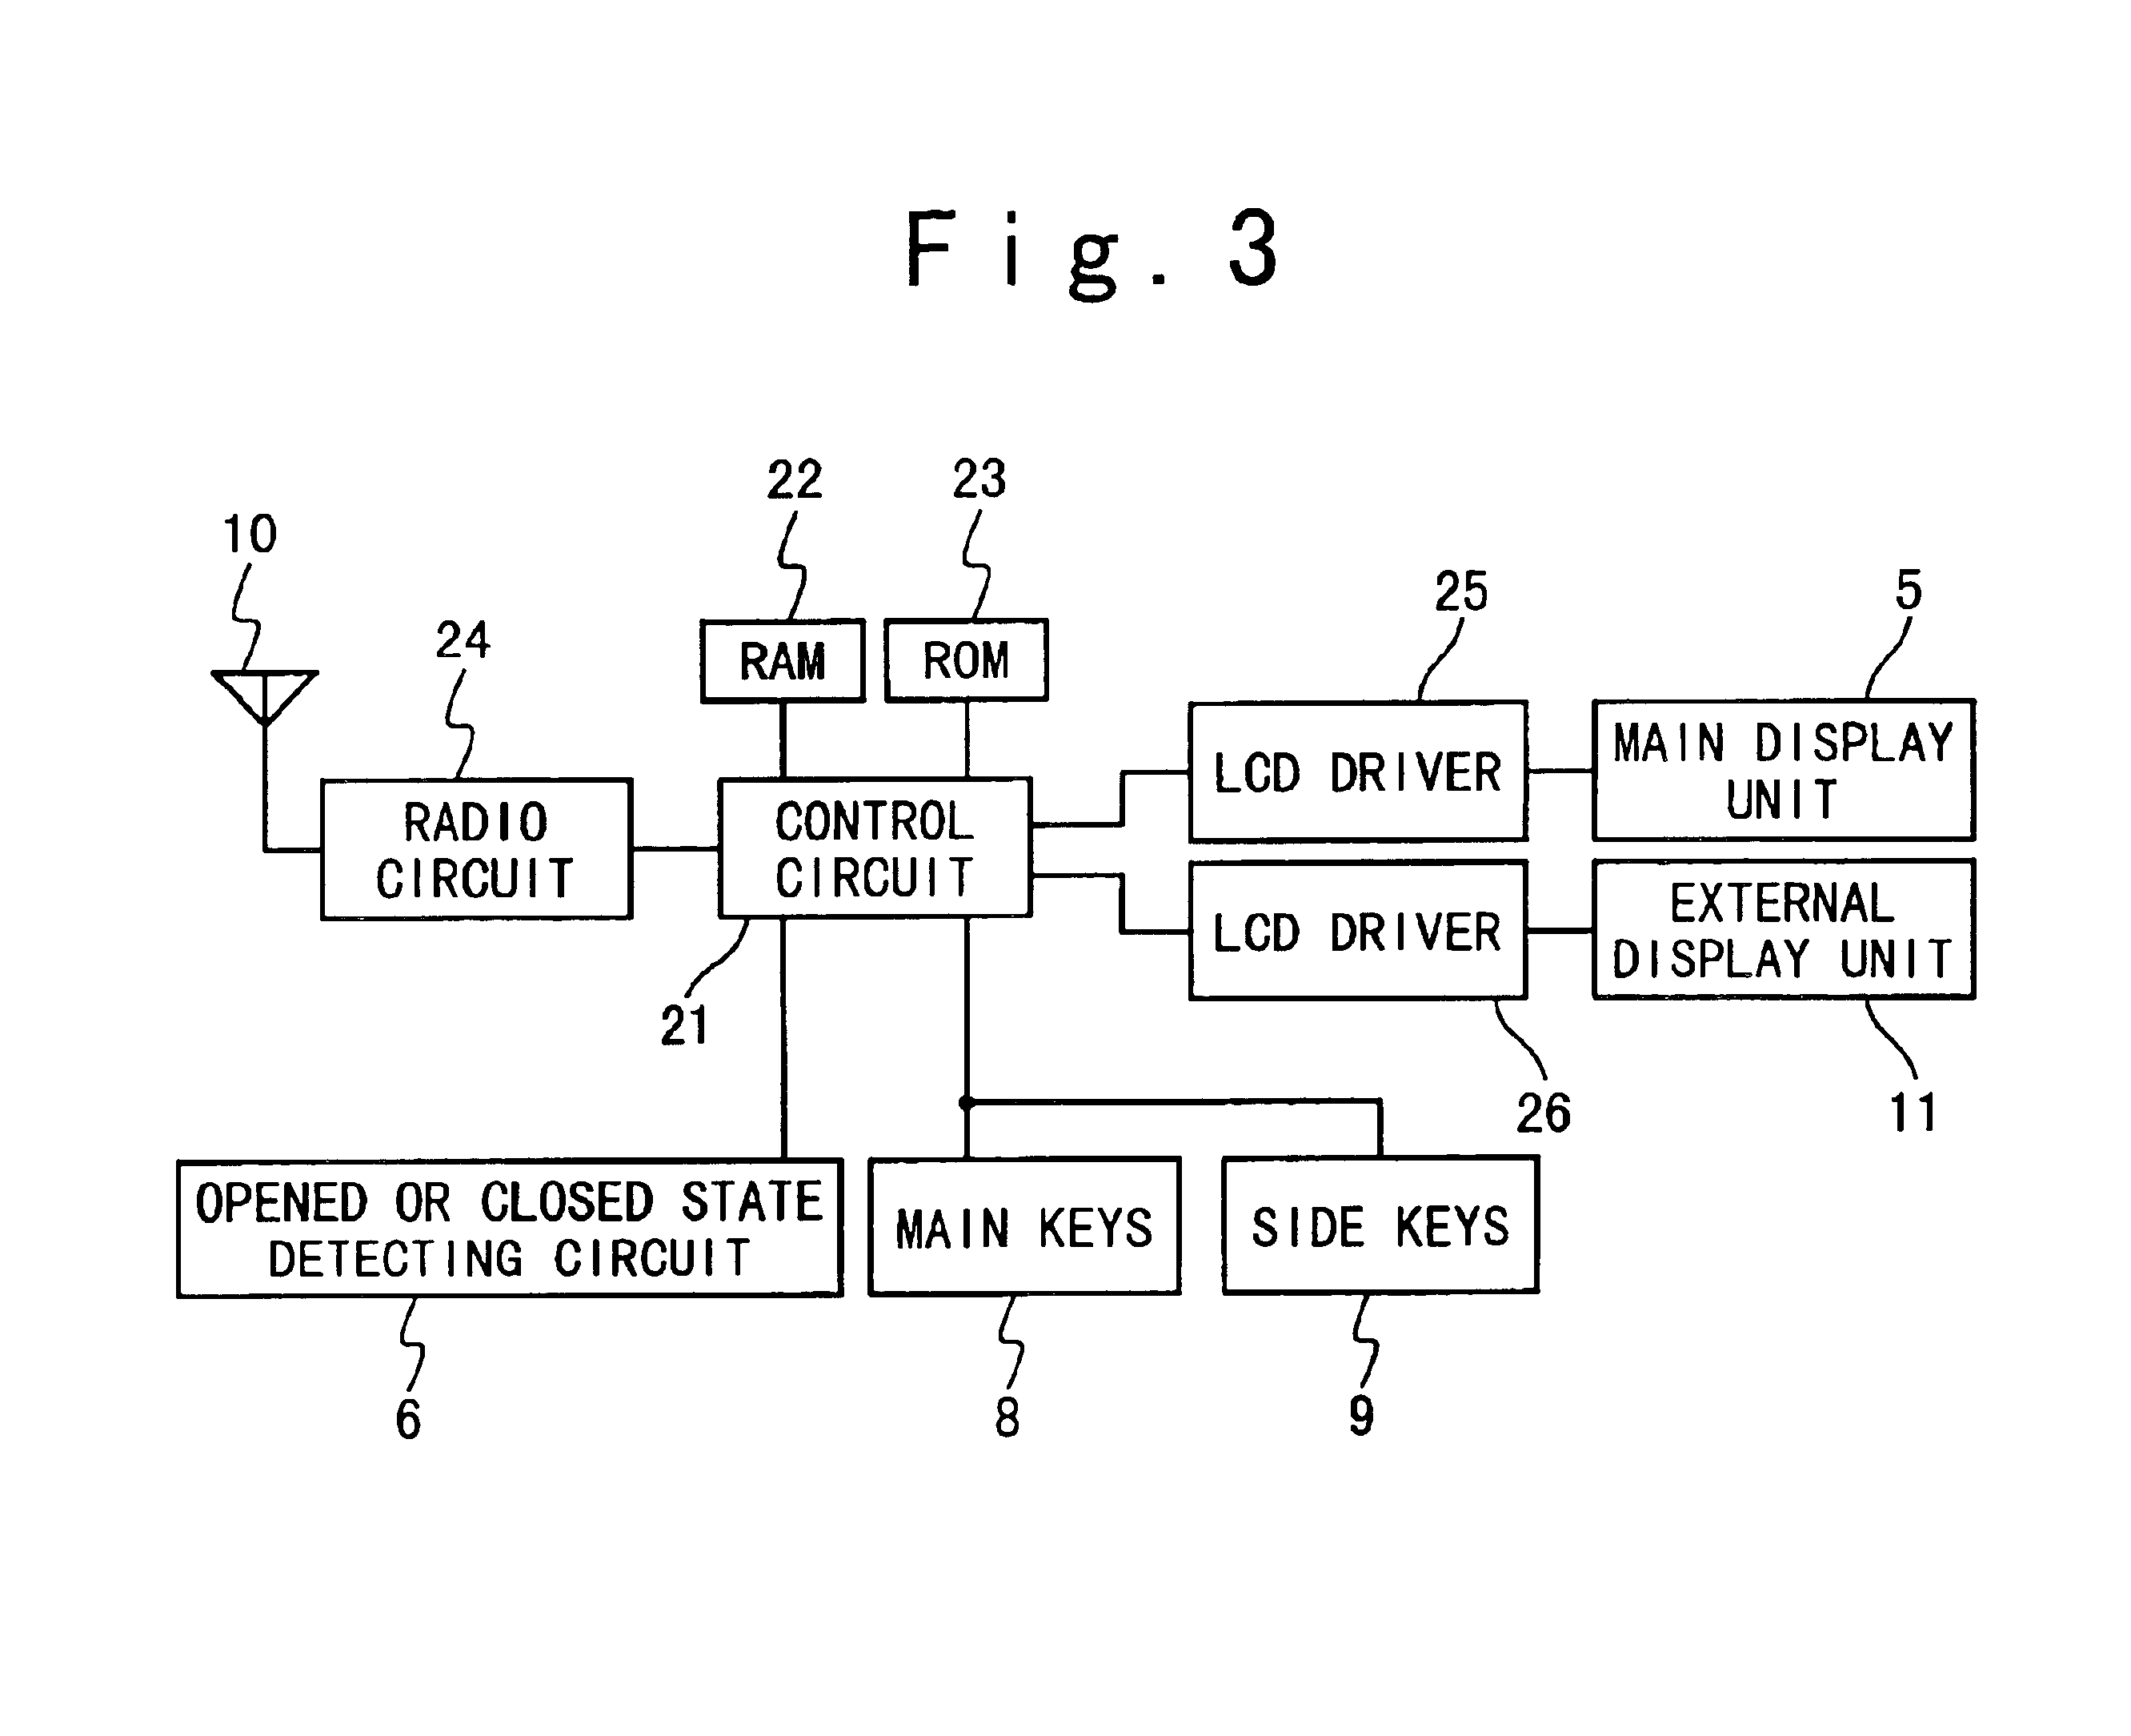 Mobile communication terminal with external display unit